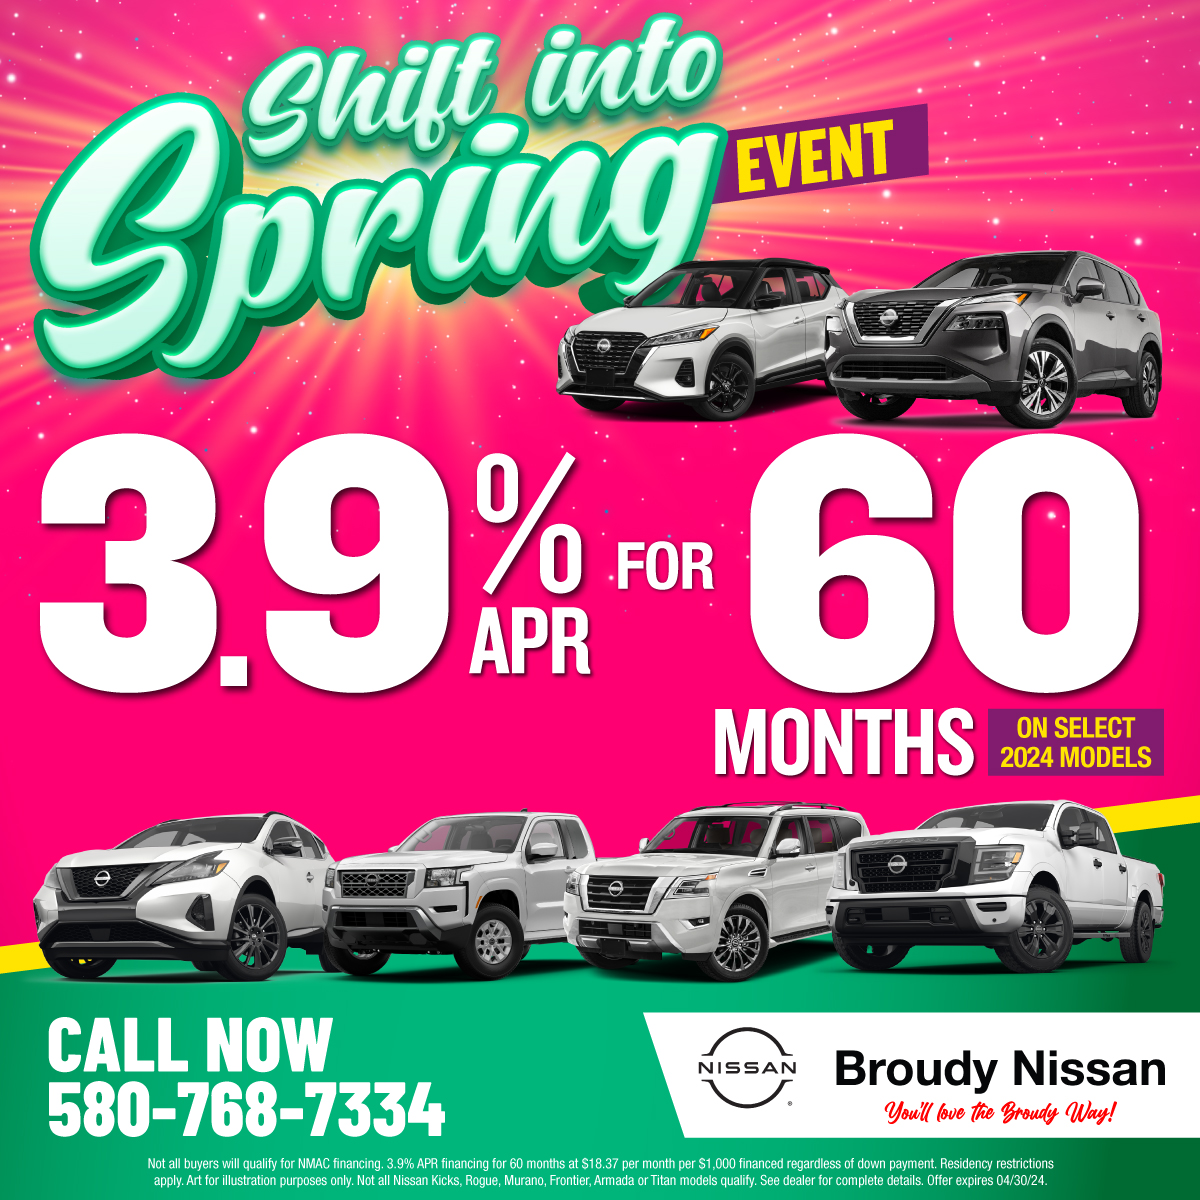 Upgrade your ride this spring🌸 Take advantage of our Shift Into Spring Event at Broudy Nissan and get deals like 3.9% APR for 60 months on select 2024 models🚘

Don't settle for less, visit Broudy Nissan✅ (link in bio)

#BroudyNissan #NissanUSA #NewVehicles #2024Nissans